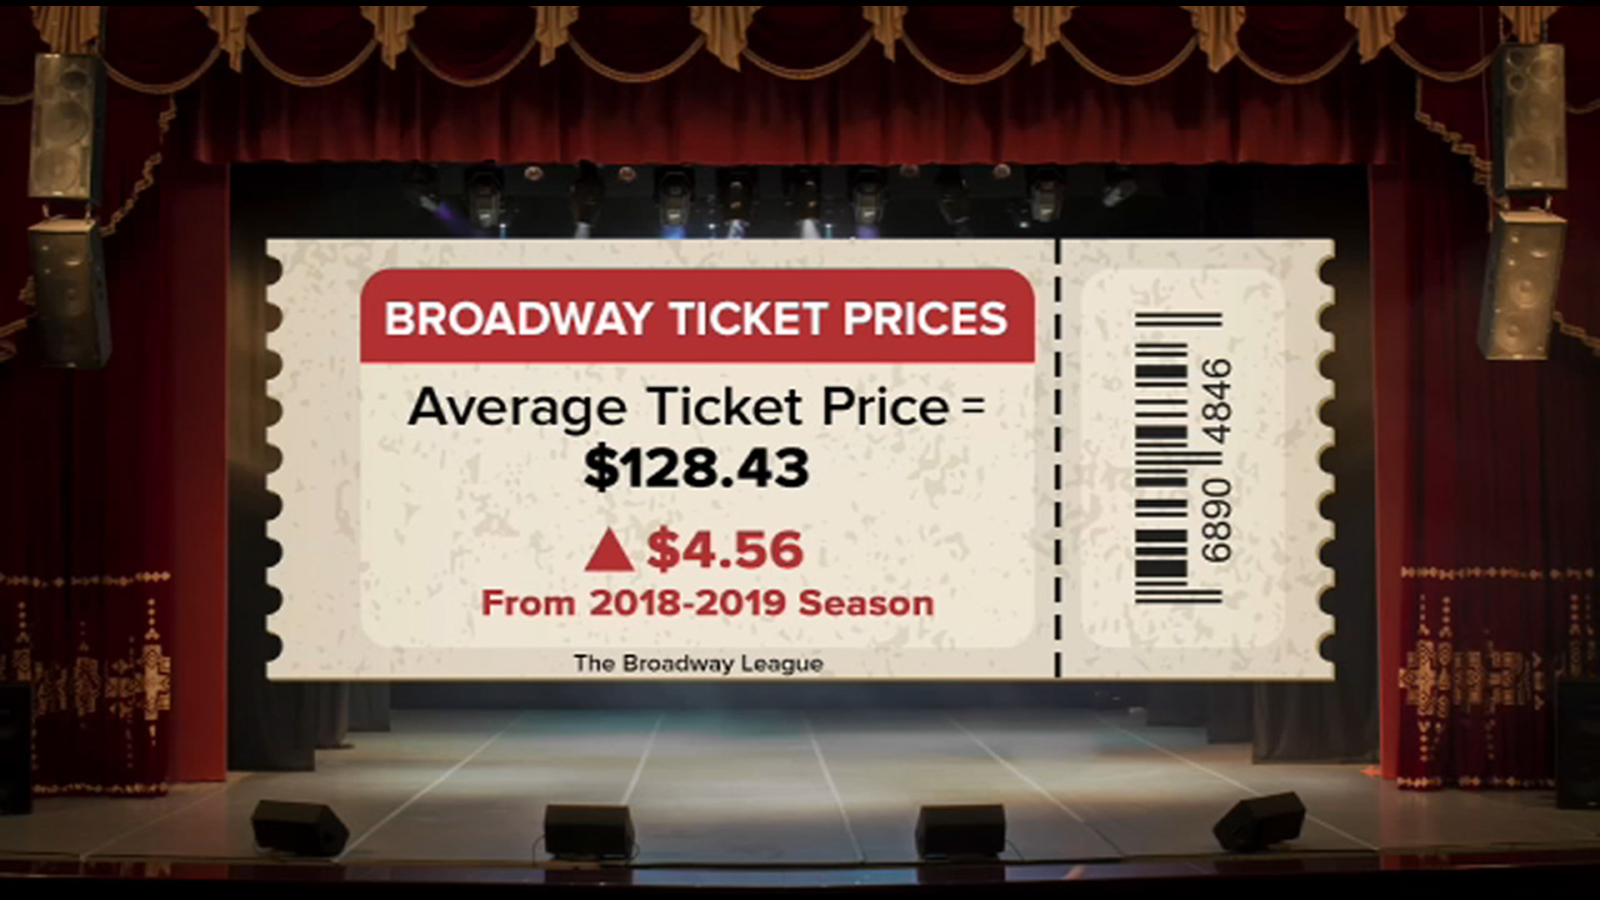 Broadway ticket prices for shows skyrocket reaching new all-time high